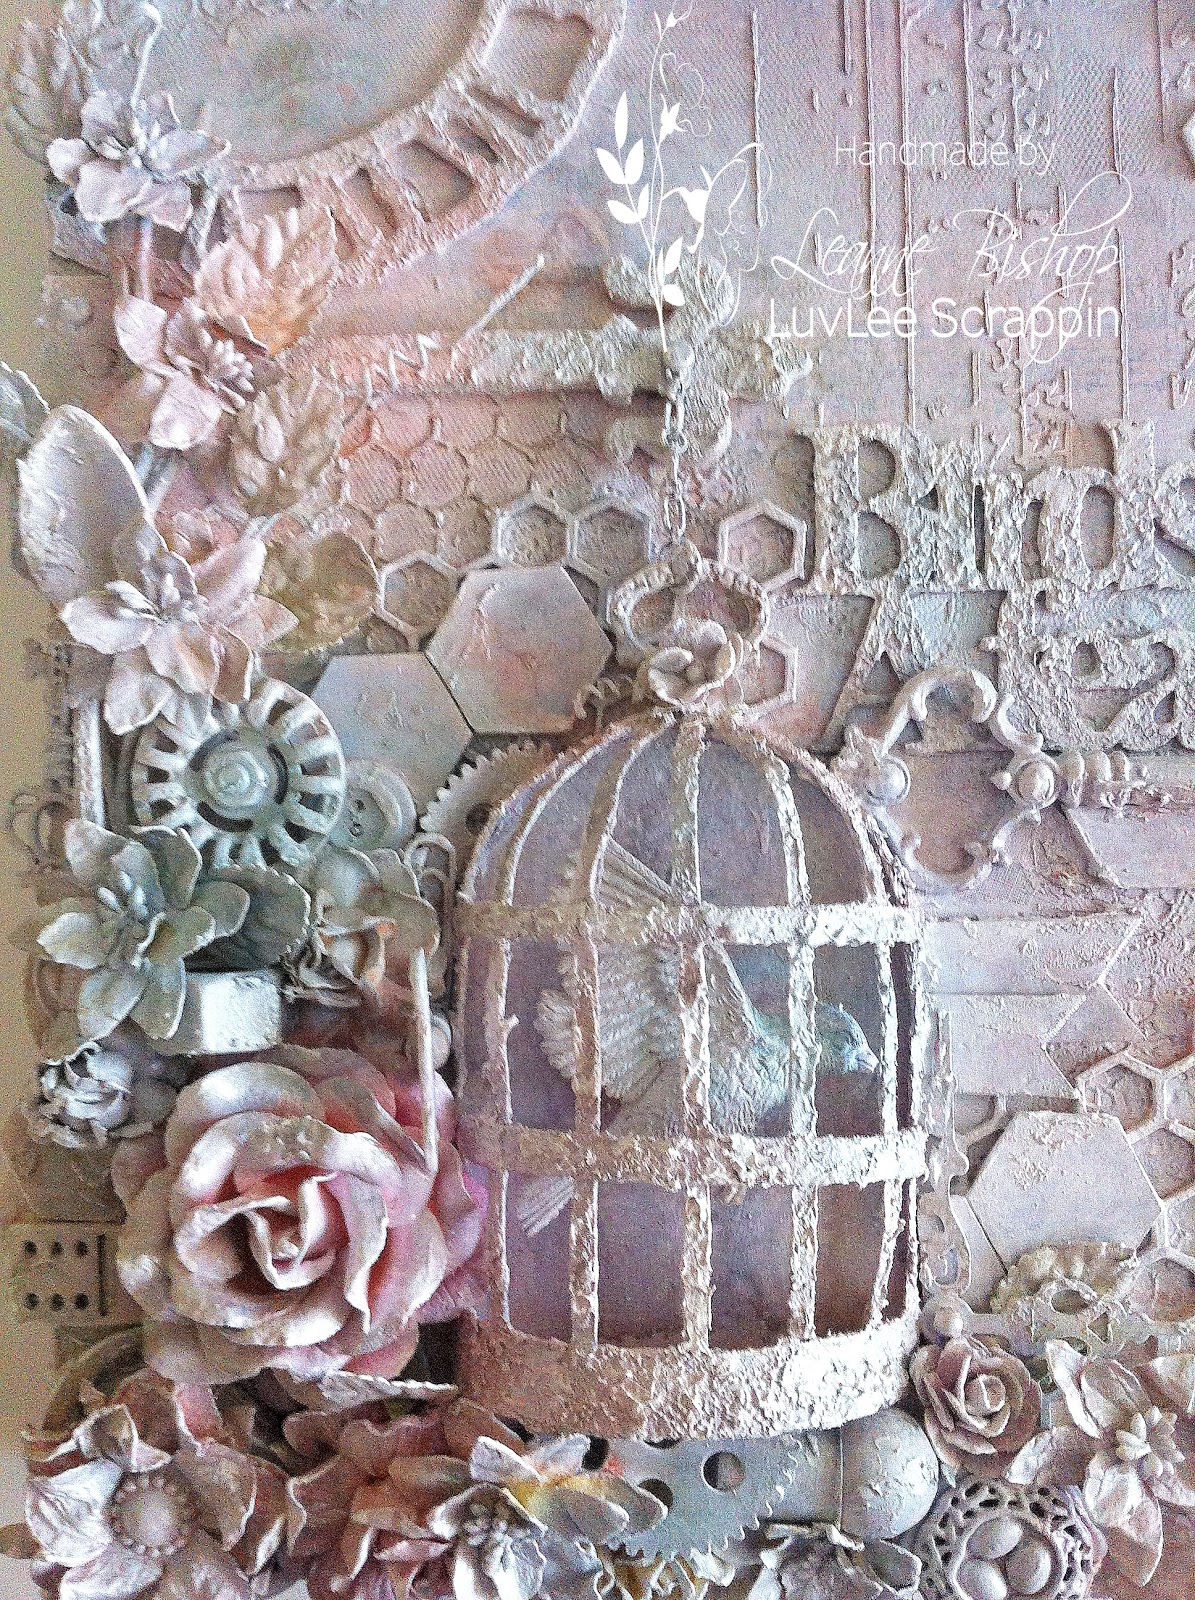 LuvLee Scrappin: Birds of a Feather ~ Mixed Media Canvas Collage